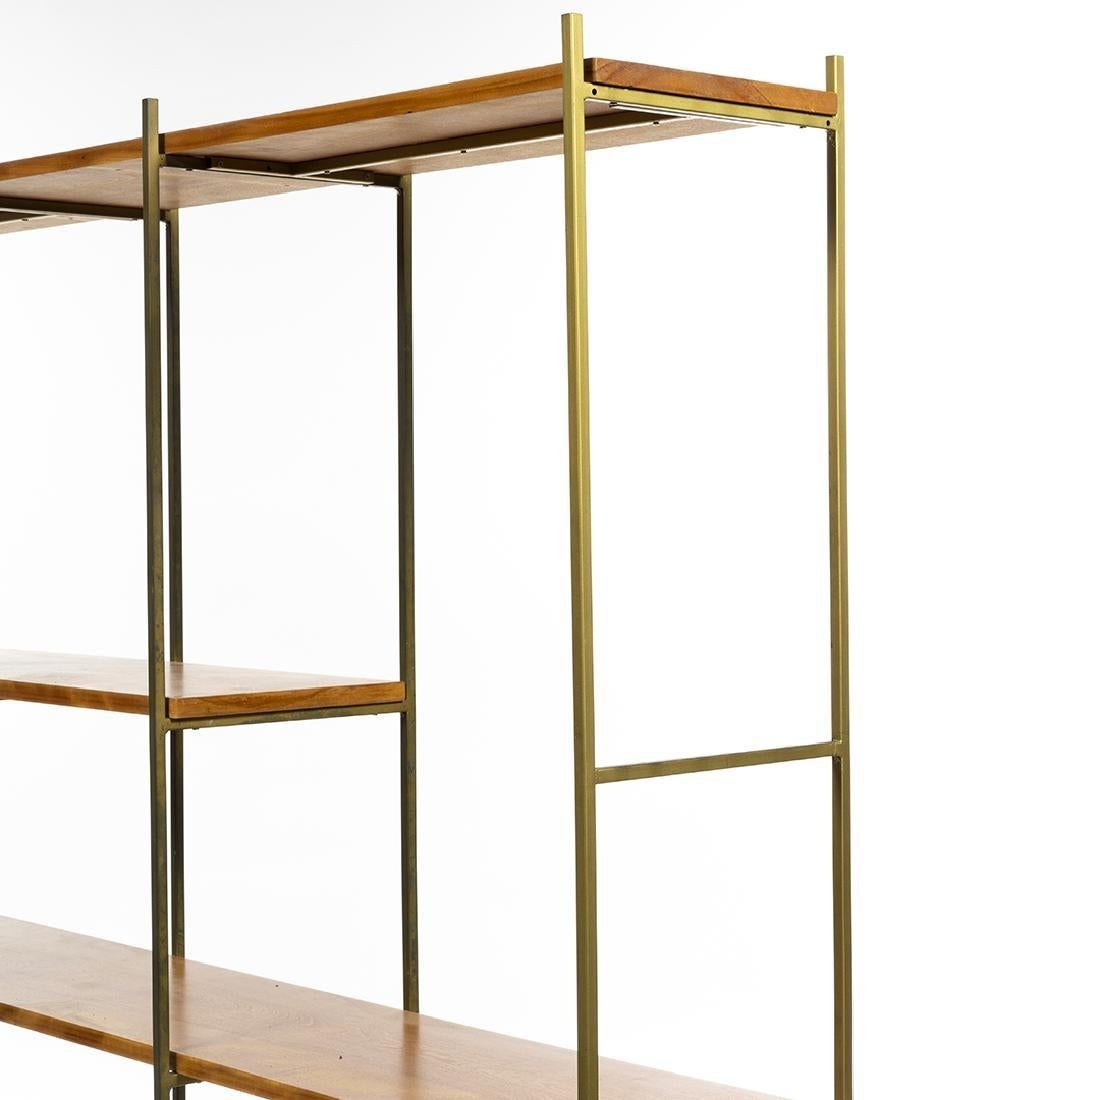 American Kenneth Lind Mid-Century Wood & Metal Room Divider, circa 1950s For Sale